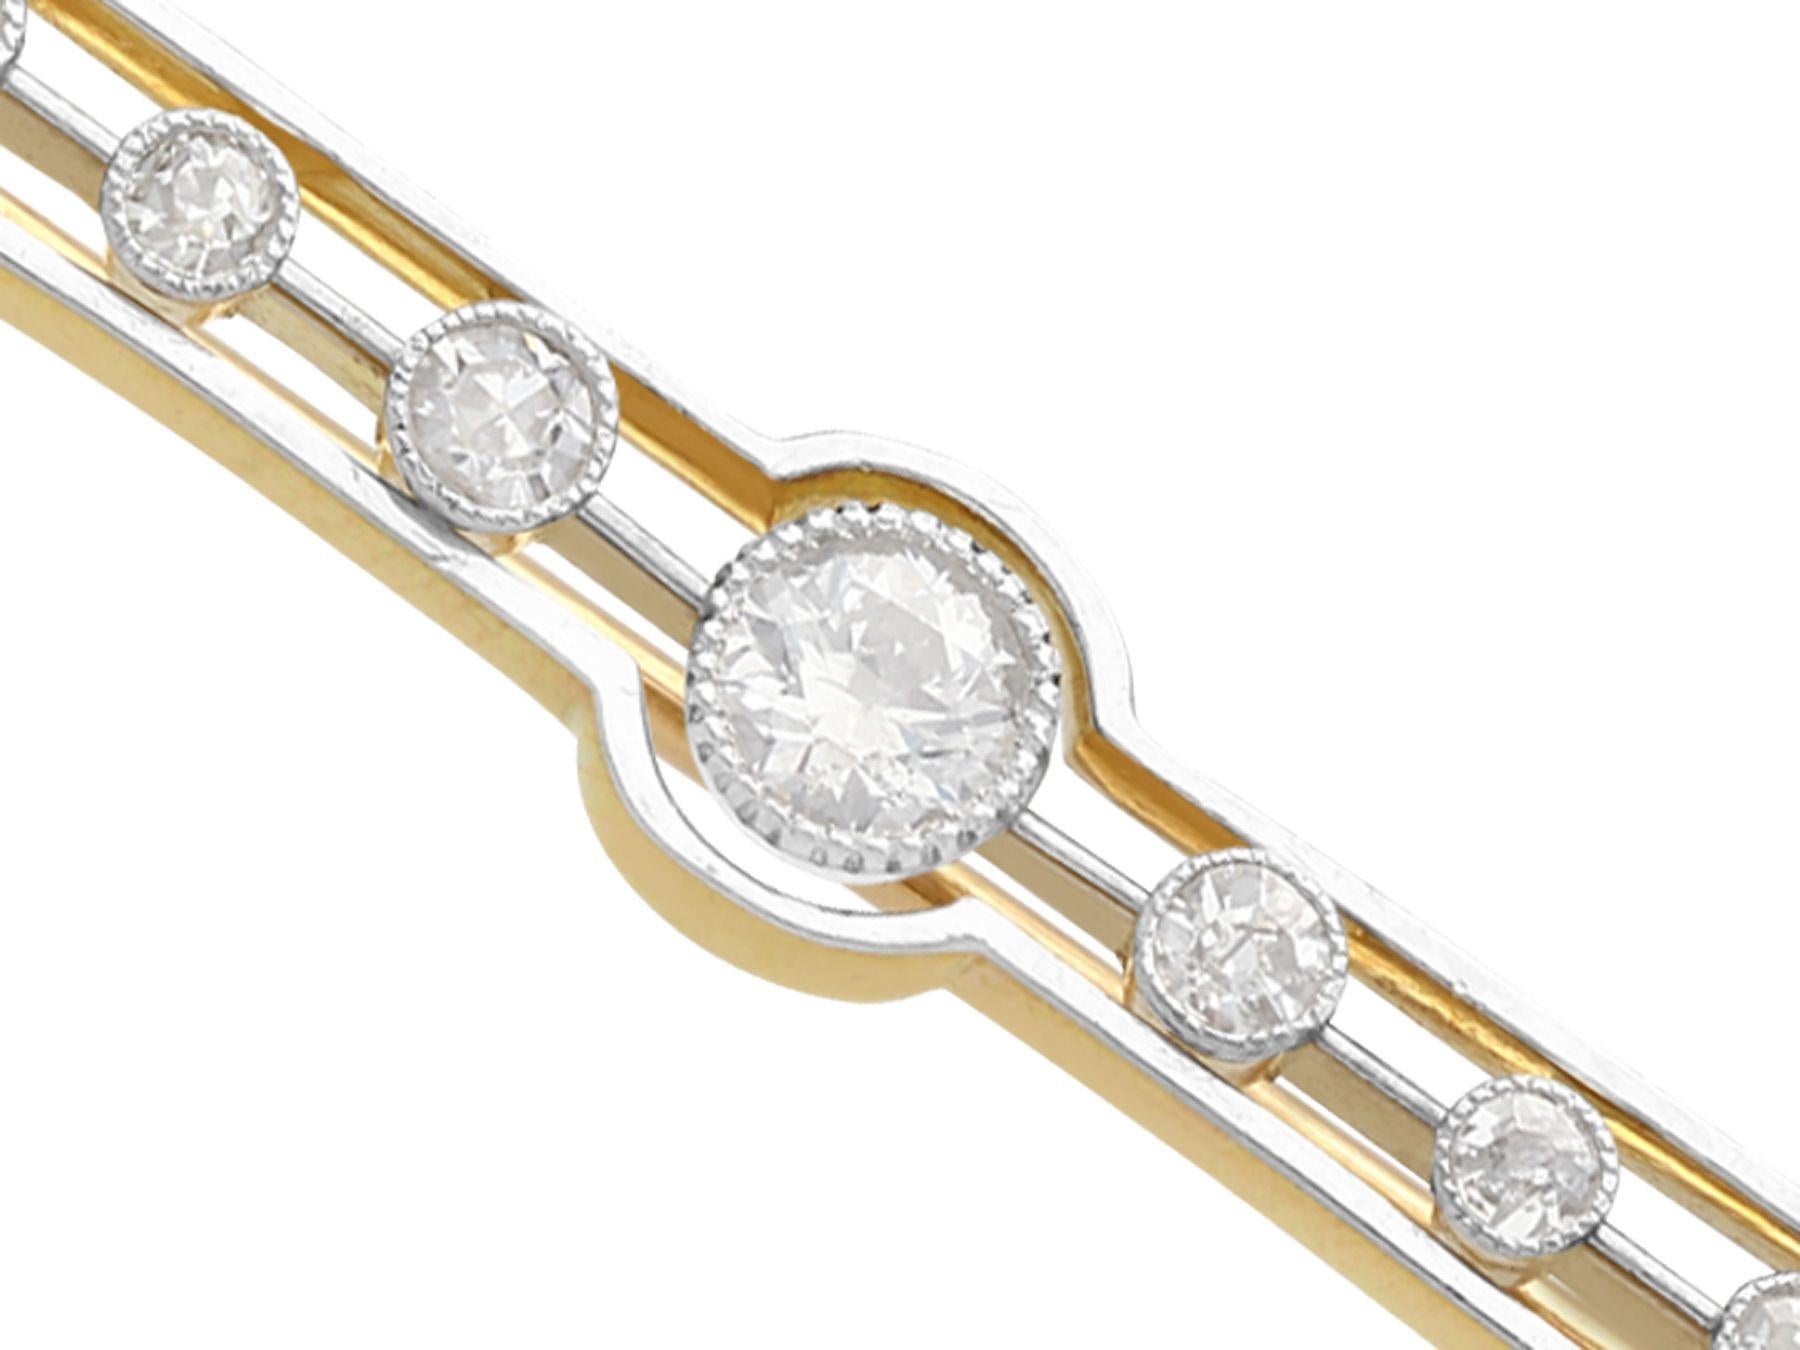 A fine and impressive antique 0.77 carat diamond and 18 karat yellow gold, platinum set bar brooch; part of our antique jewelry and estate jewelry collections.

This fine and impressive antique bar brooch has been crafted in 18k yellow gold with a